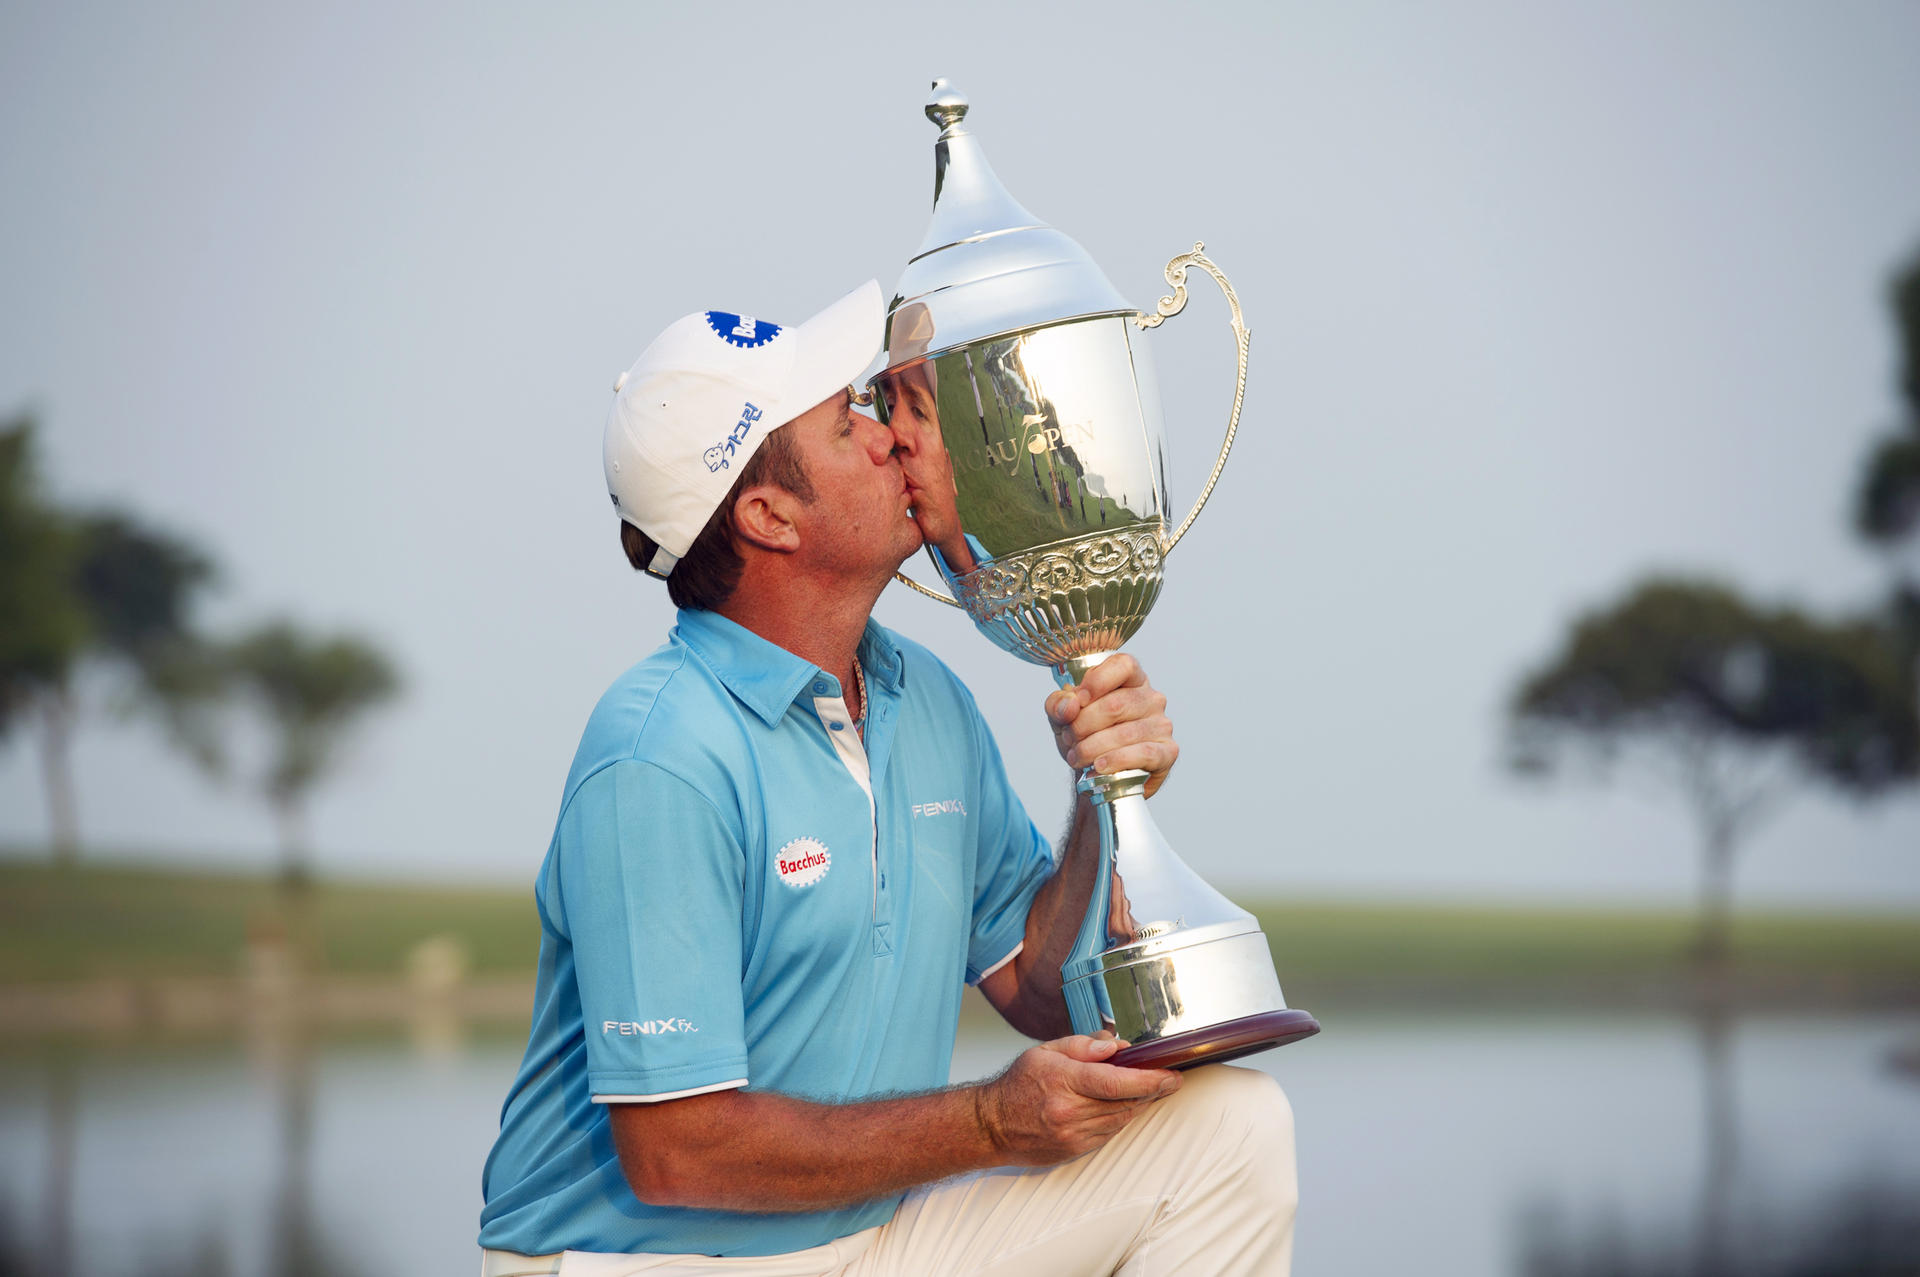 Australian Scott Hend won the Macao Open in 2013 and finished second in 2014. He hopes to capture the trophy this October. Photo: Asian Tour